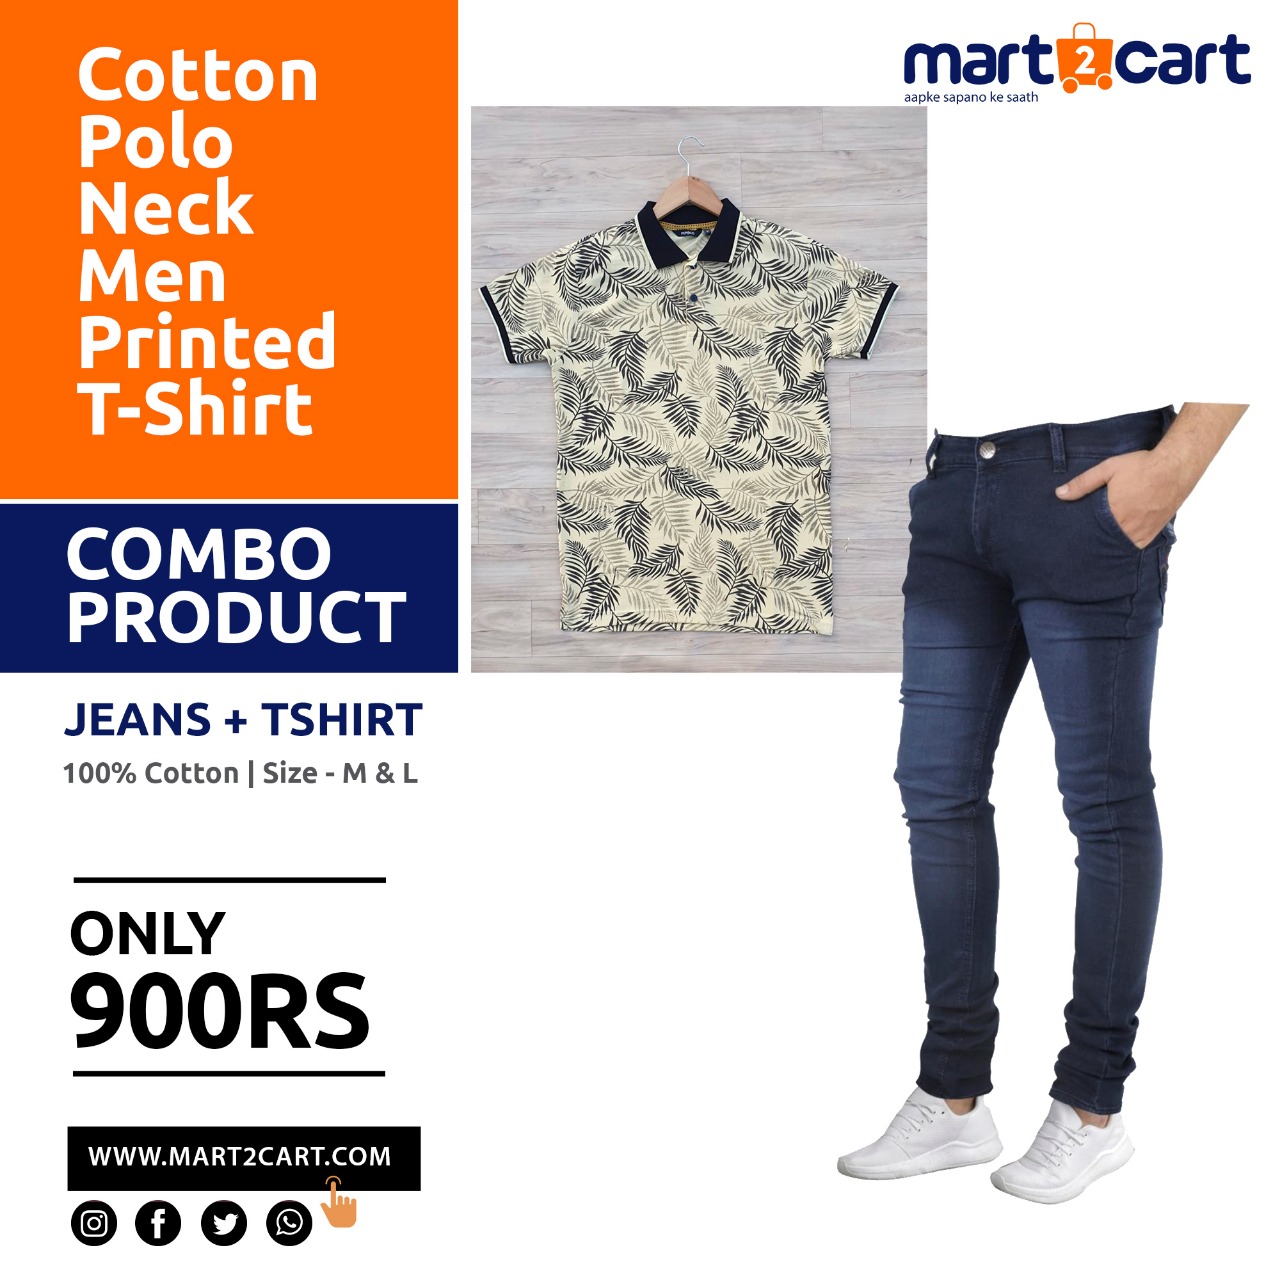 Men Printed T-Shirt and Jeans